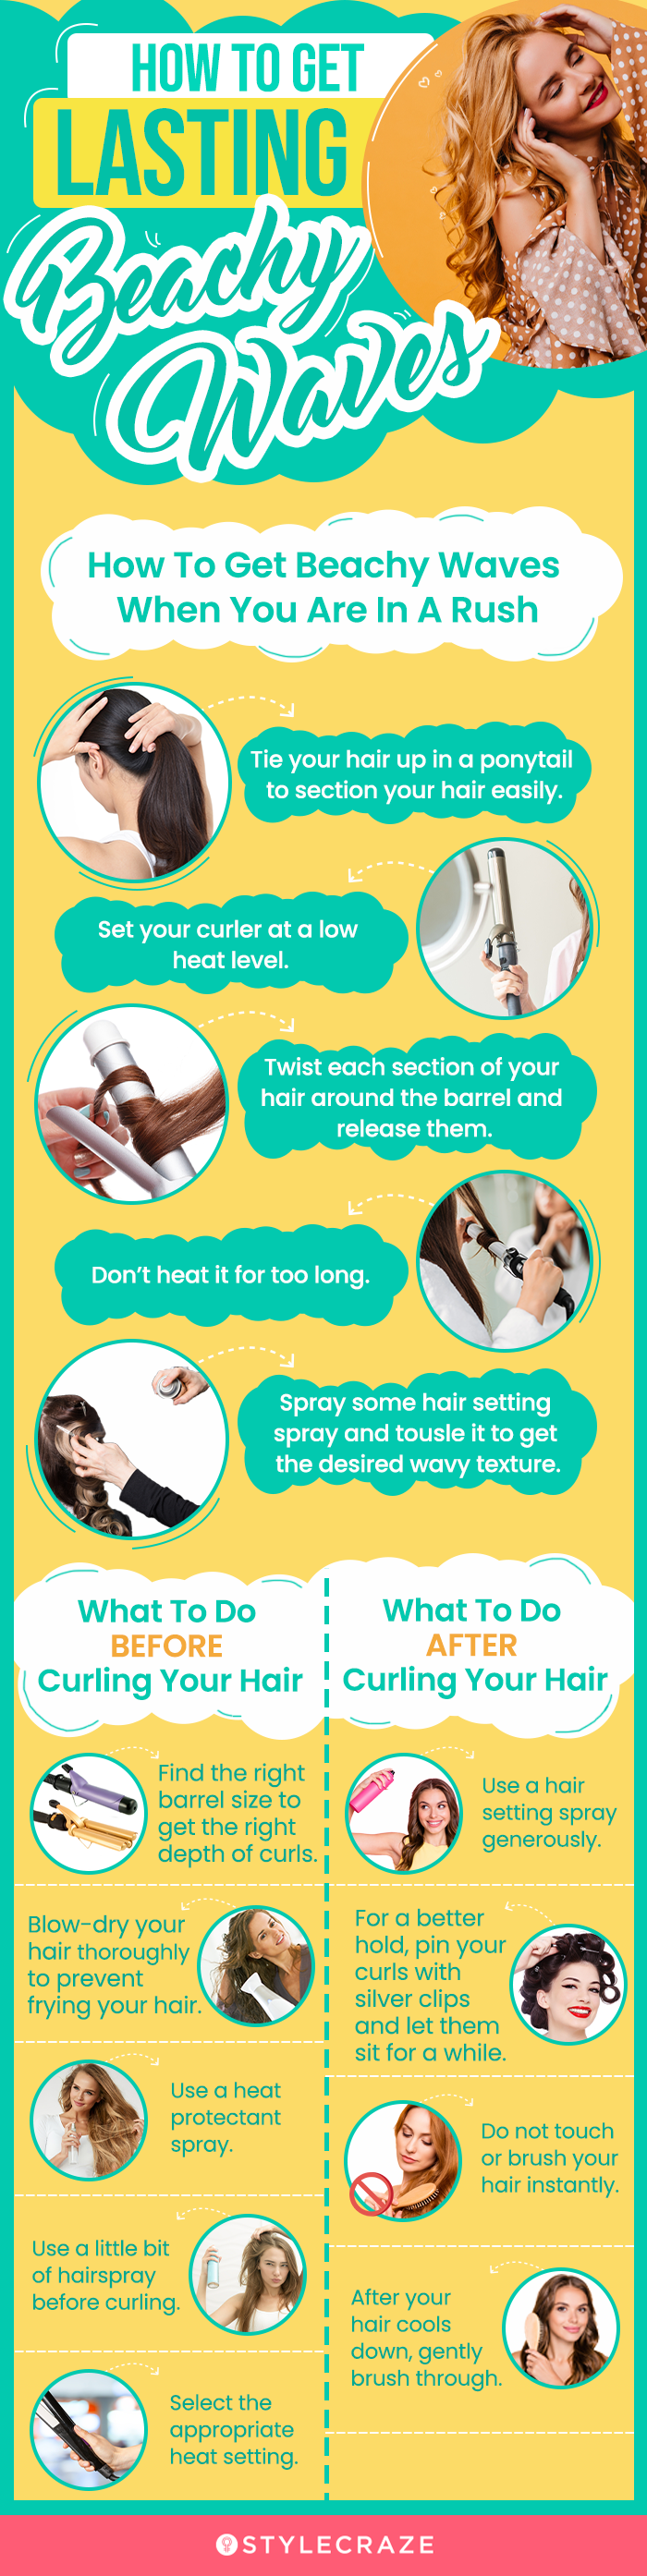 How To Get Lasting Beachy Wavy Hair (infographic)